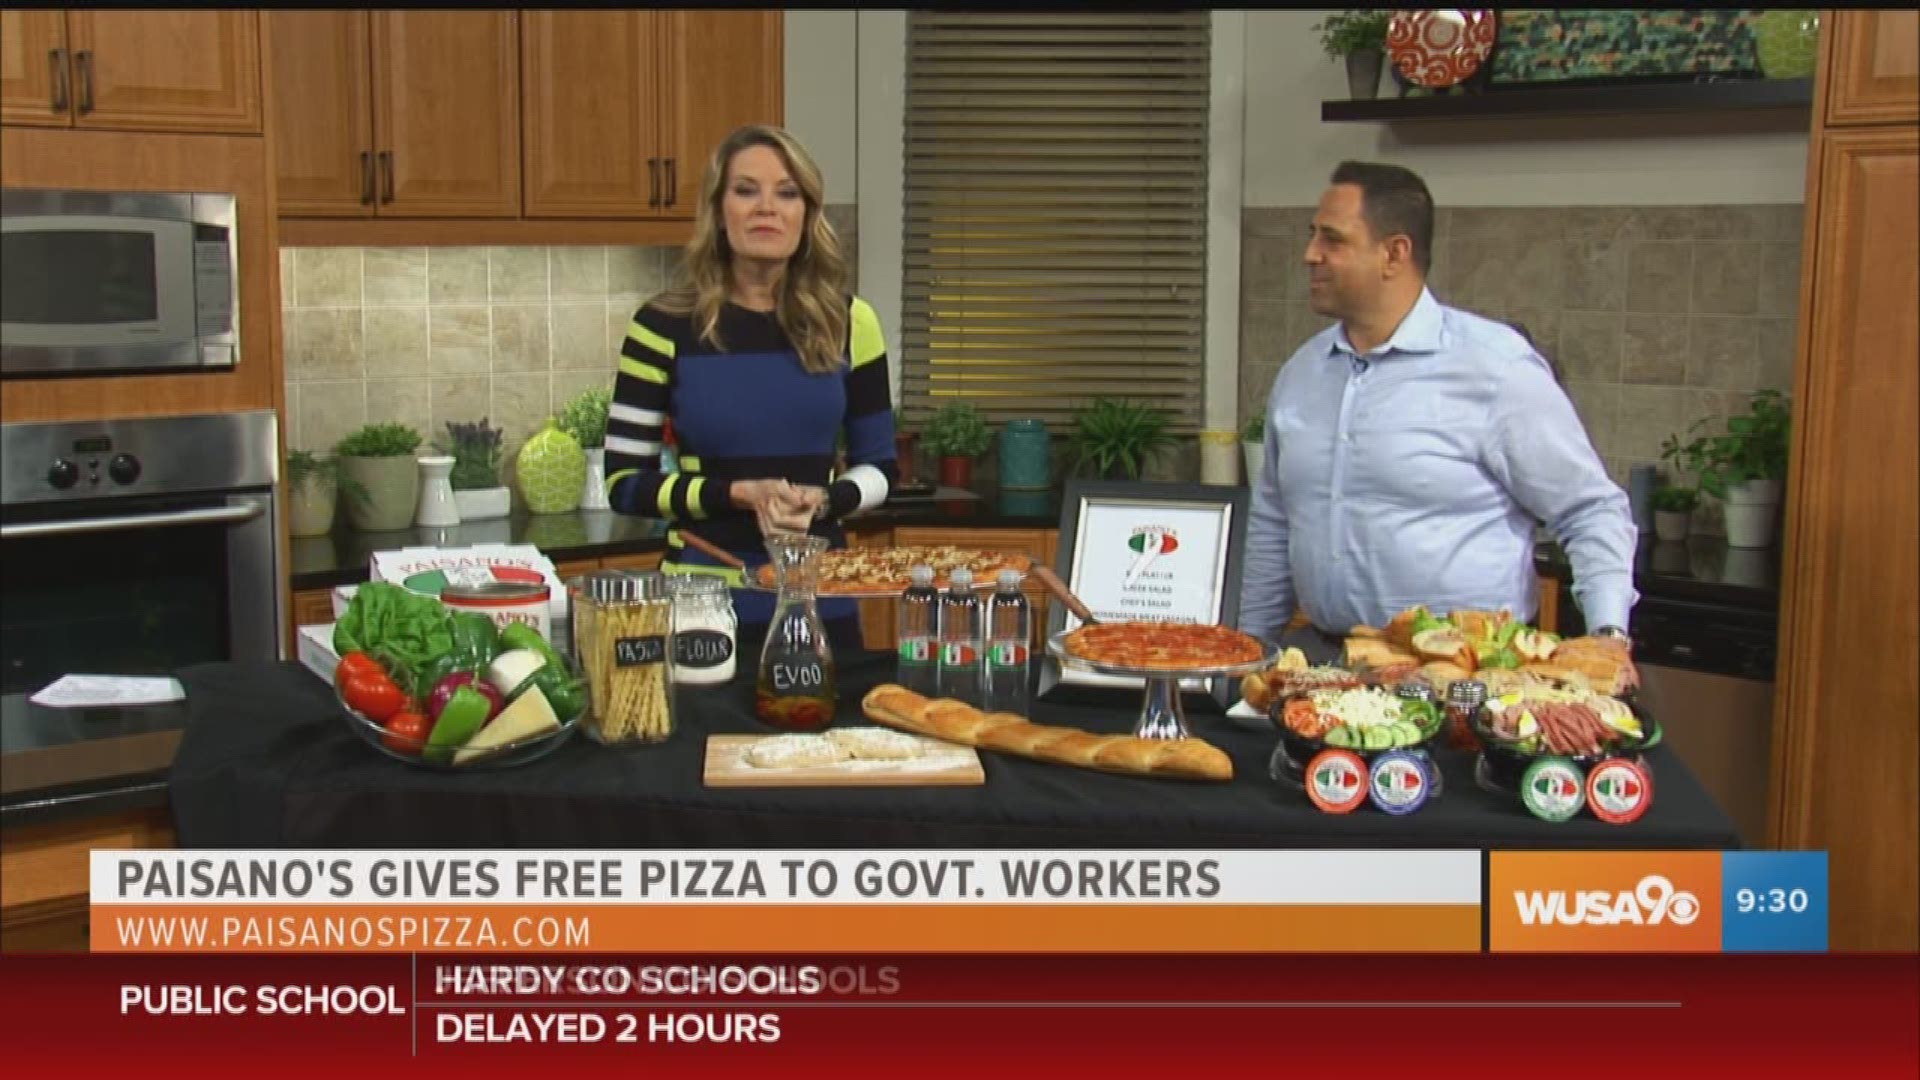 Founder and President of Paisano's Pizza, Fouad Qreitem explains how you can get a free pizza at any Paisano's location. For more information visit www.Paisanospizza.com